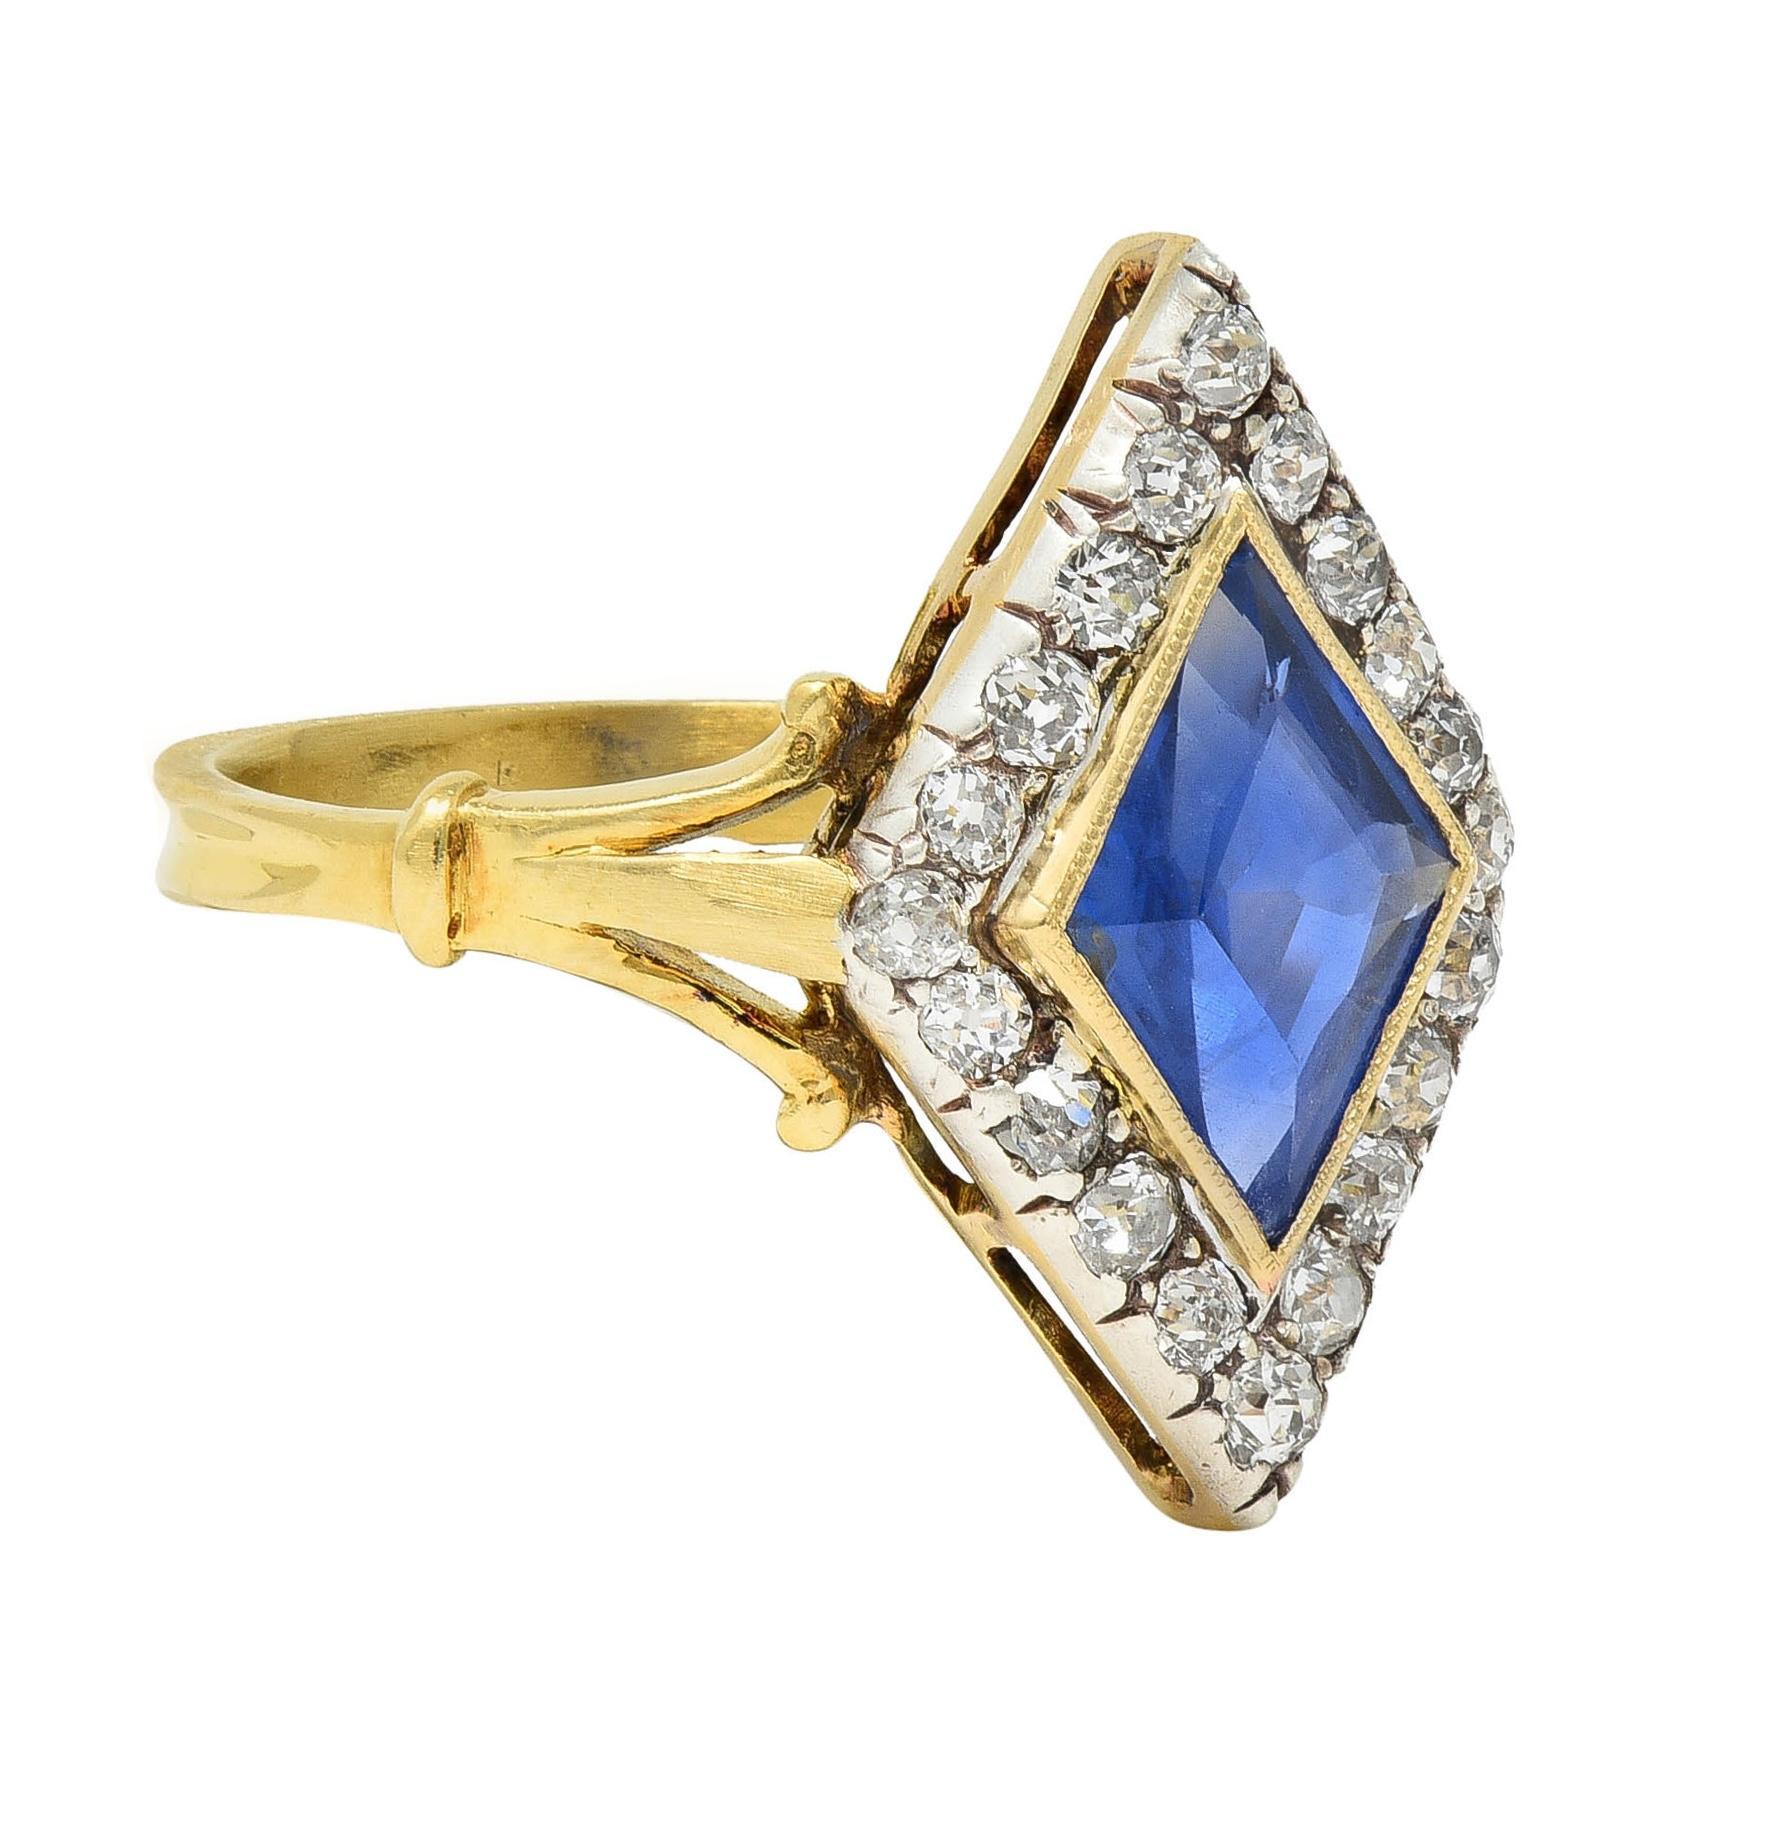 Centering a lozenge cut sapphire weighing approximately 1.80 carats - transparent medium blue in color 
Natural Sri Lankan (Ceylon) in origin and displaying no indications of heat treatment
Set in a gold bezel with a halo of old single cut diamonds